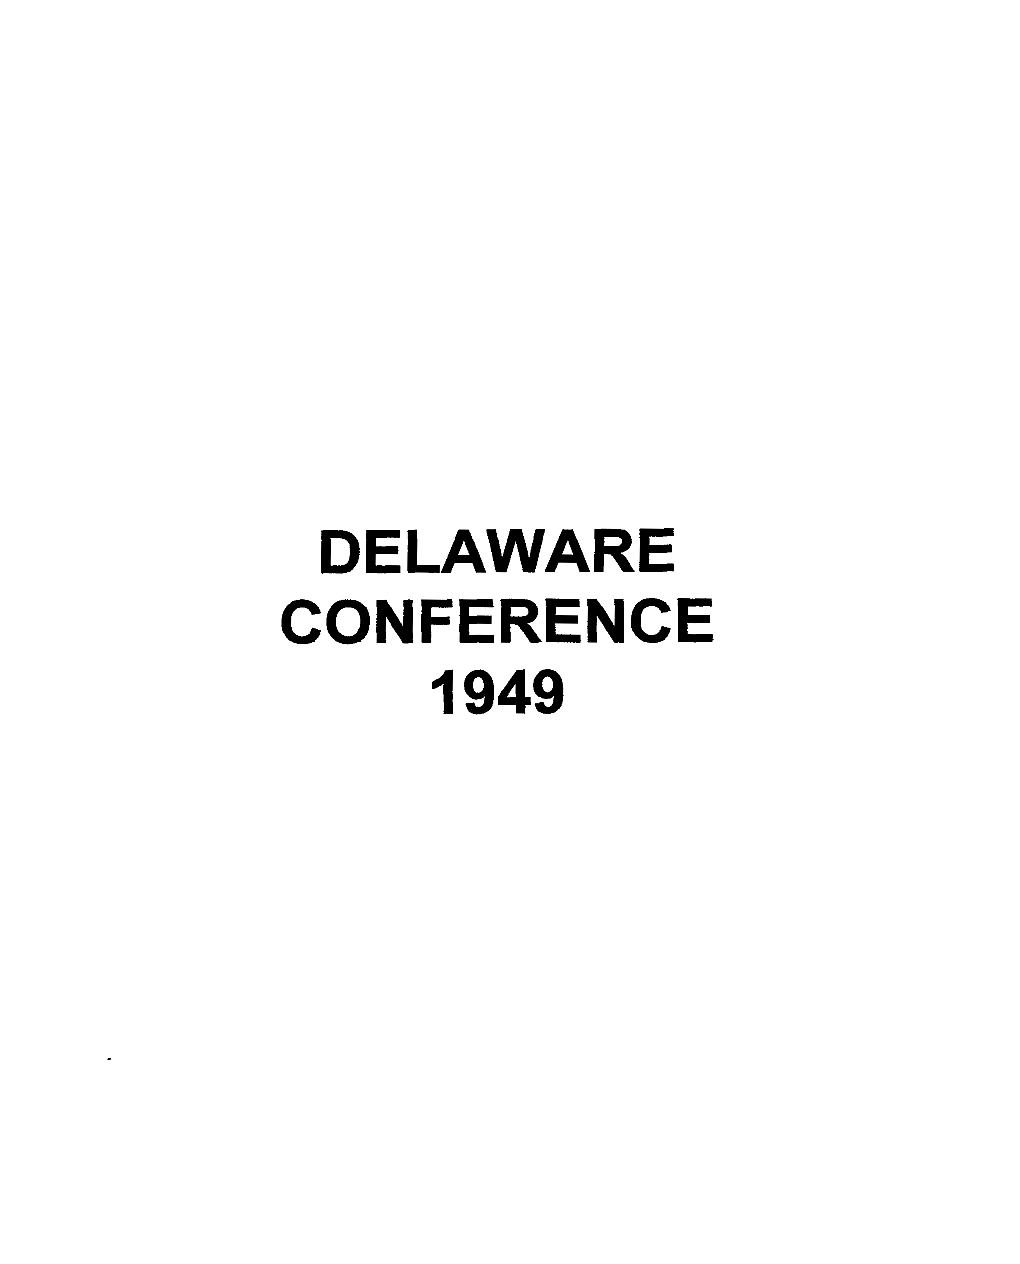 Conference 1949